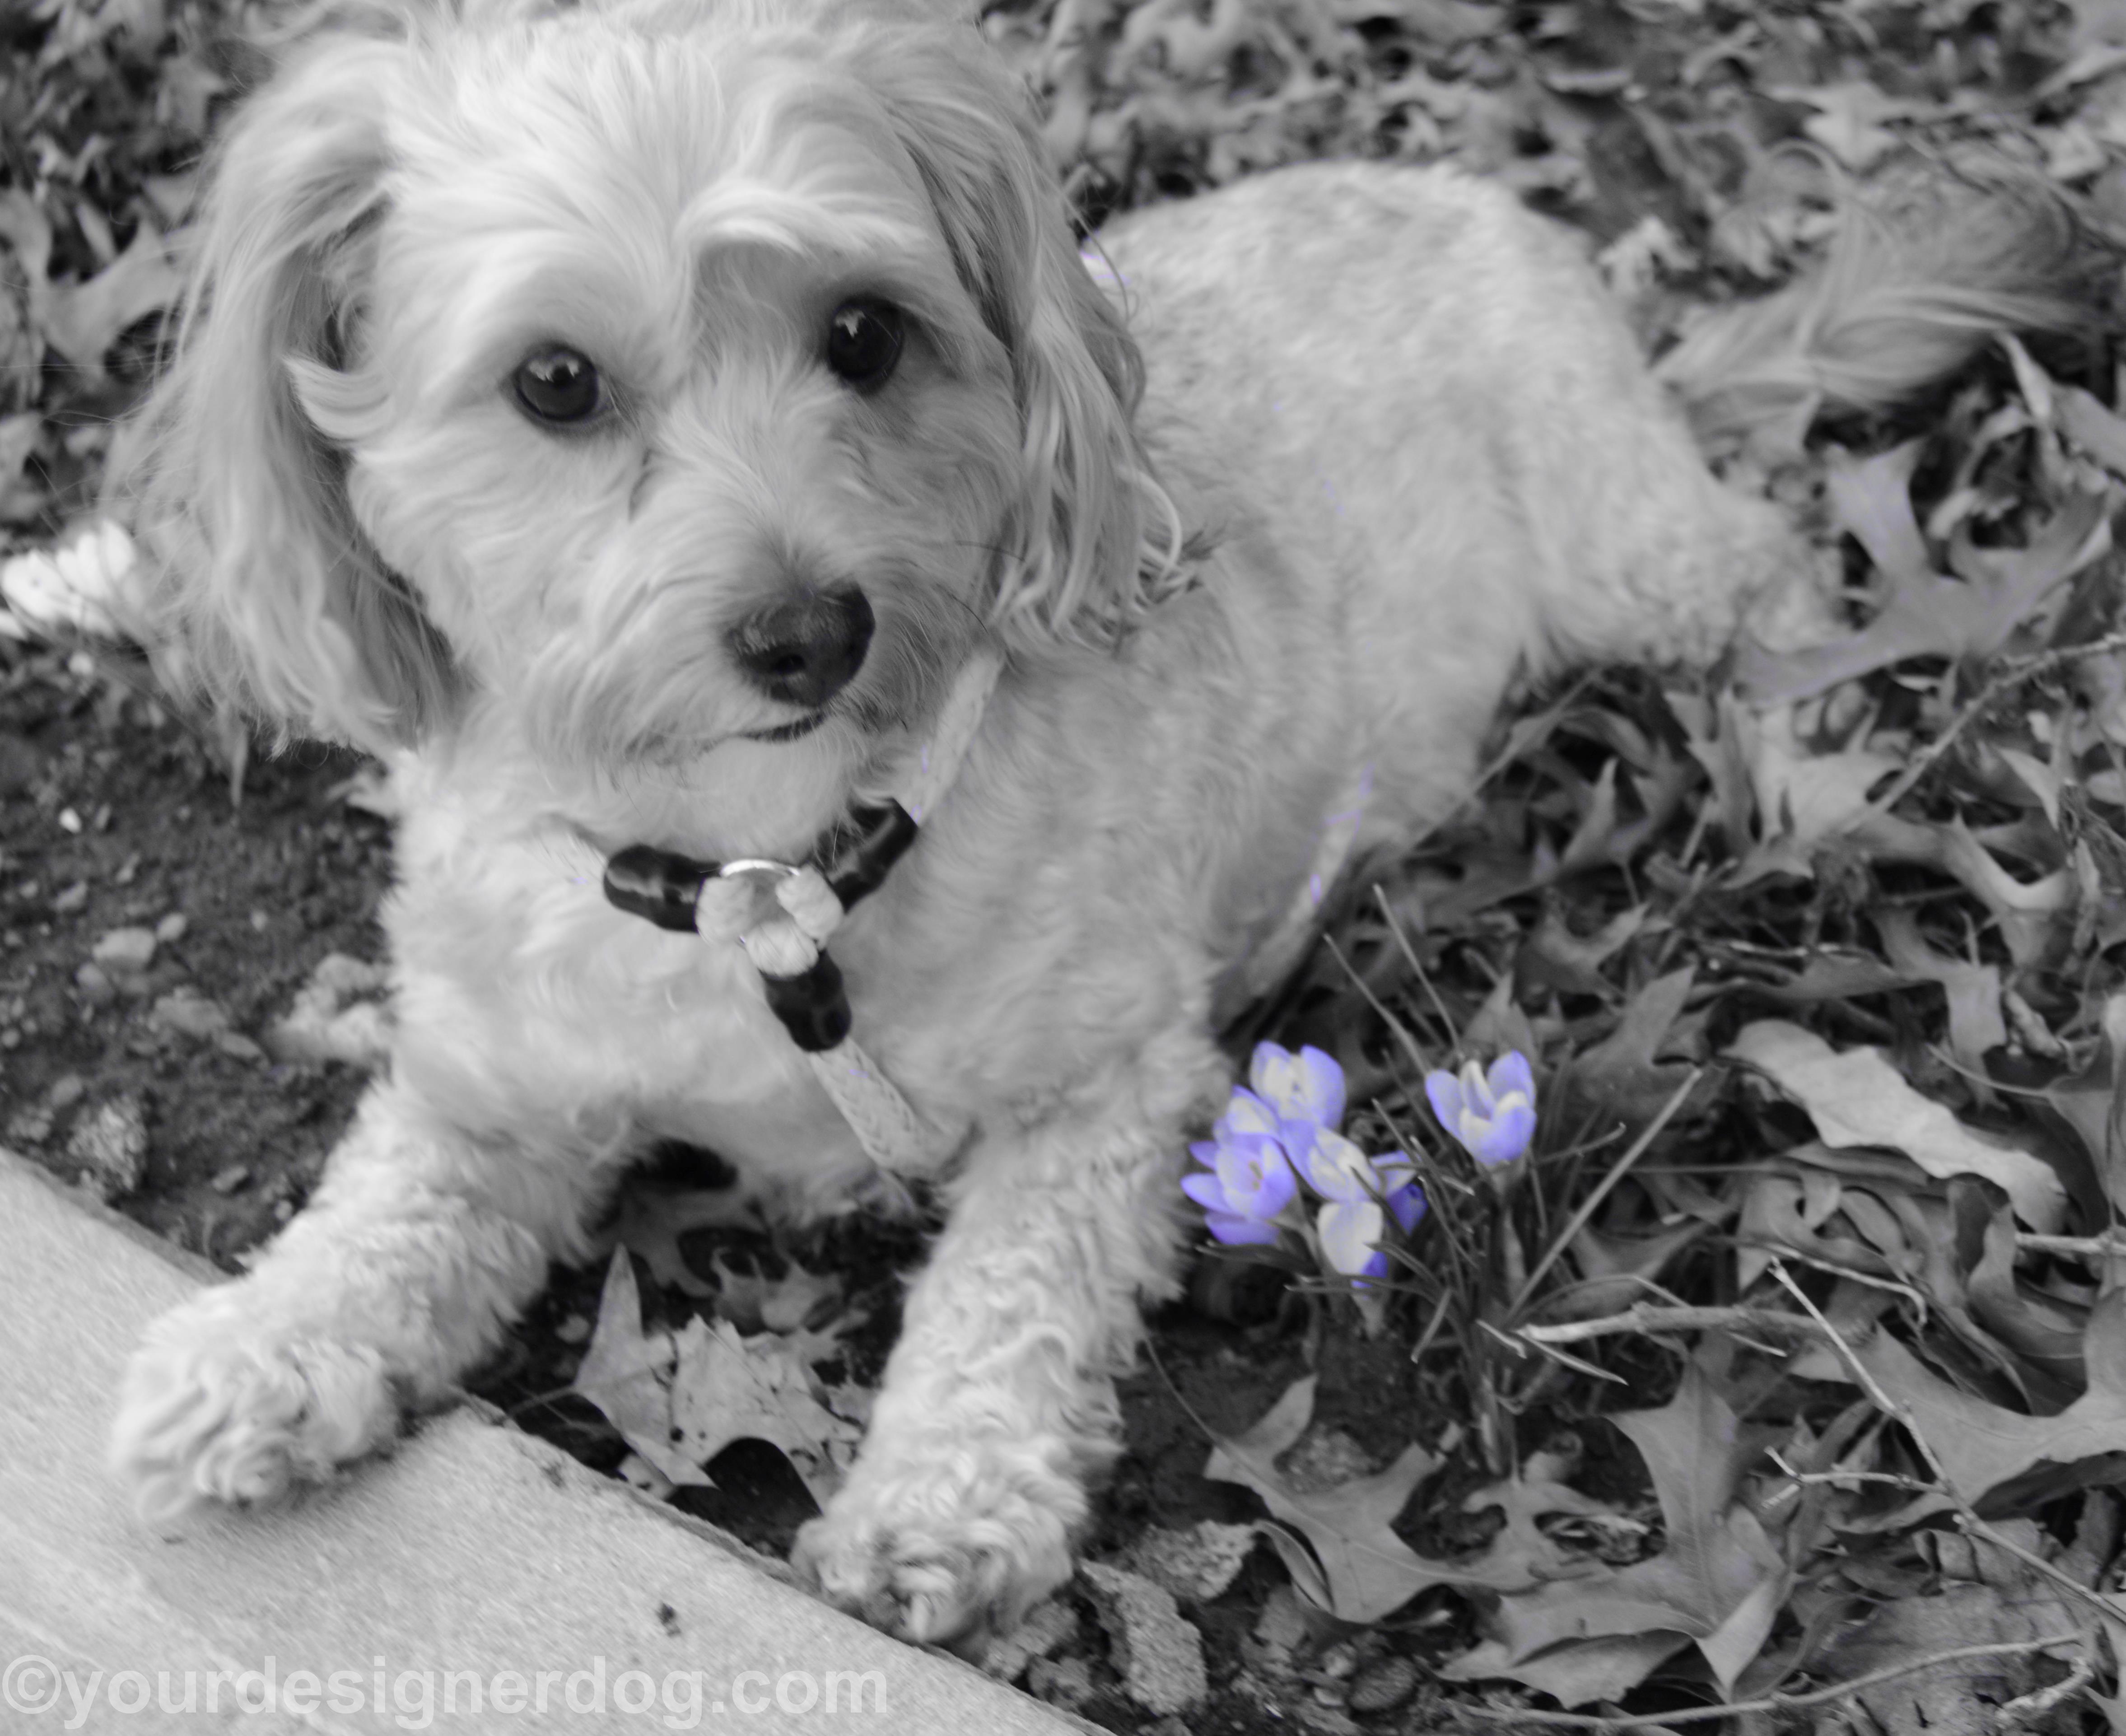 dogs, designer dogs, yorkipoo, yorkie poo, dogs with flowers, Spring, crocuses, black and white photography